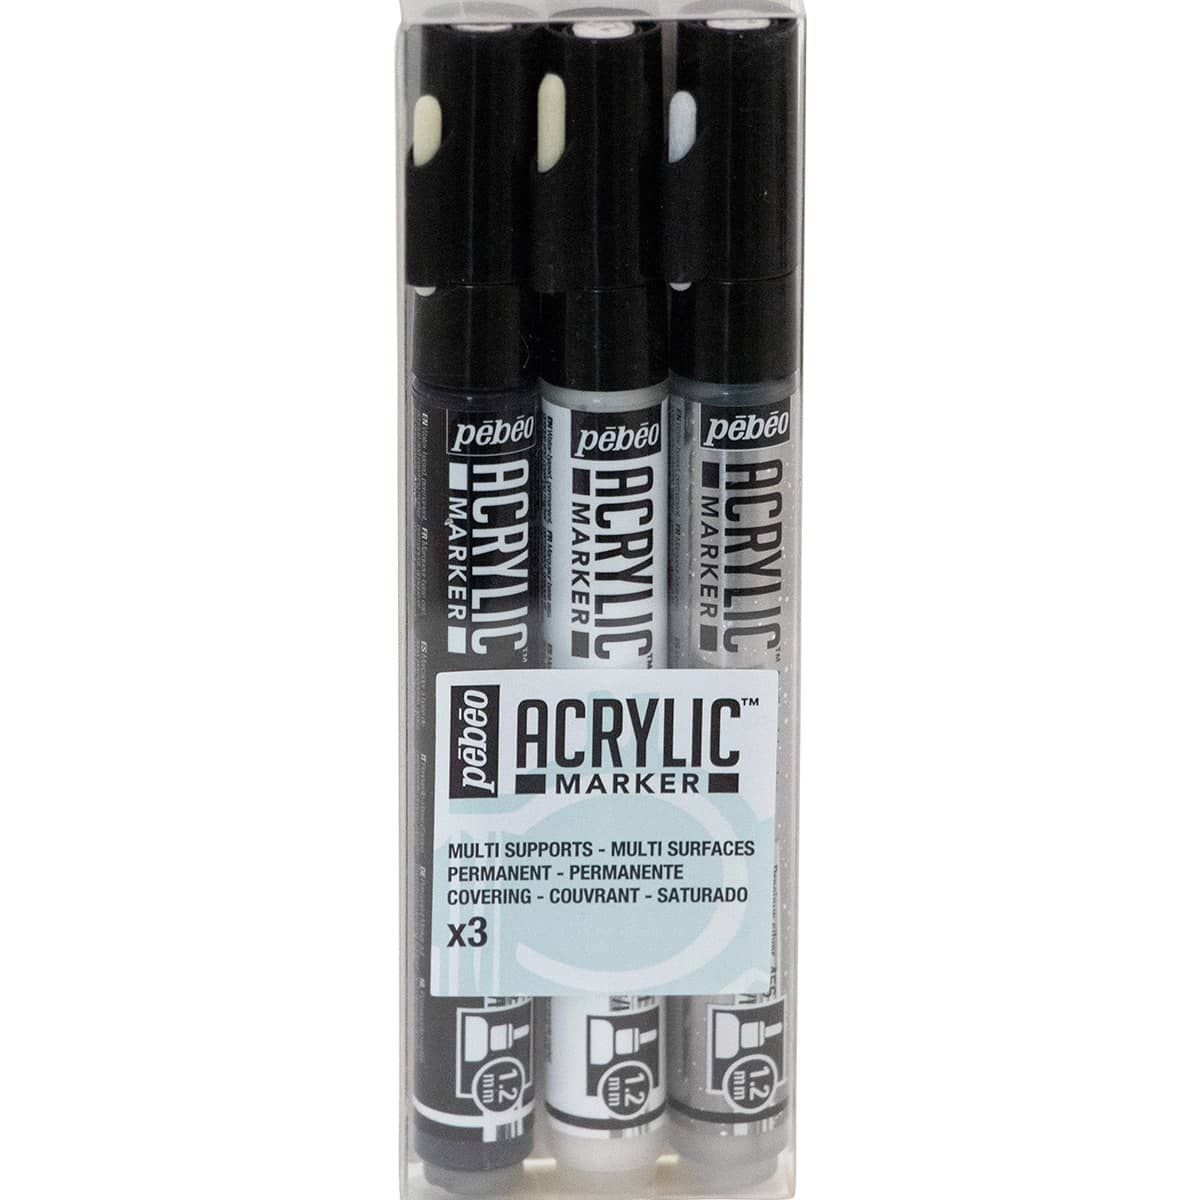 Acrylic Marker Set of 3, 1.2mm tip in Black, White, and Silver.